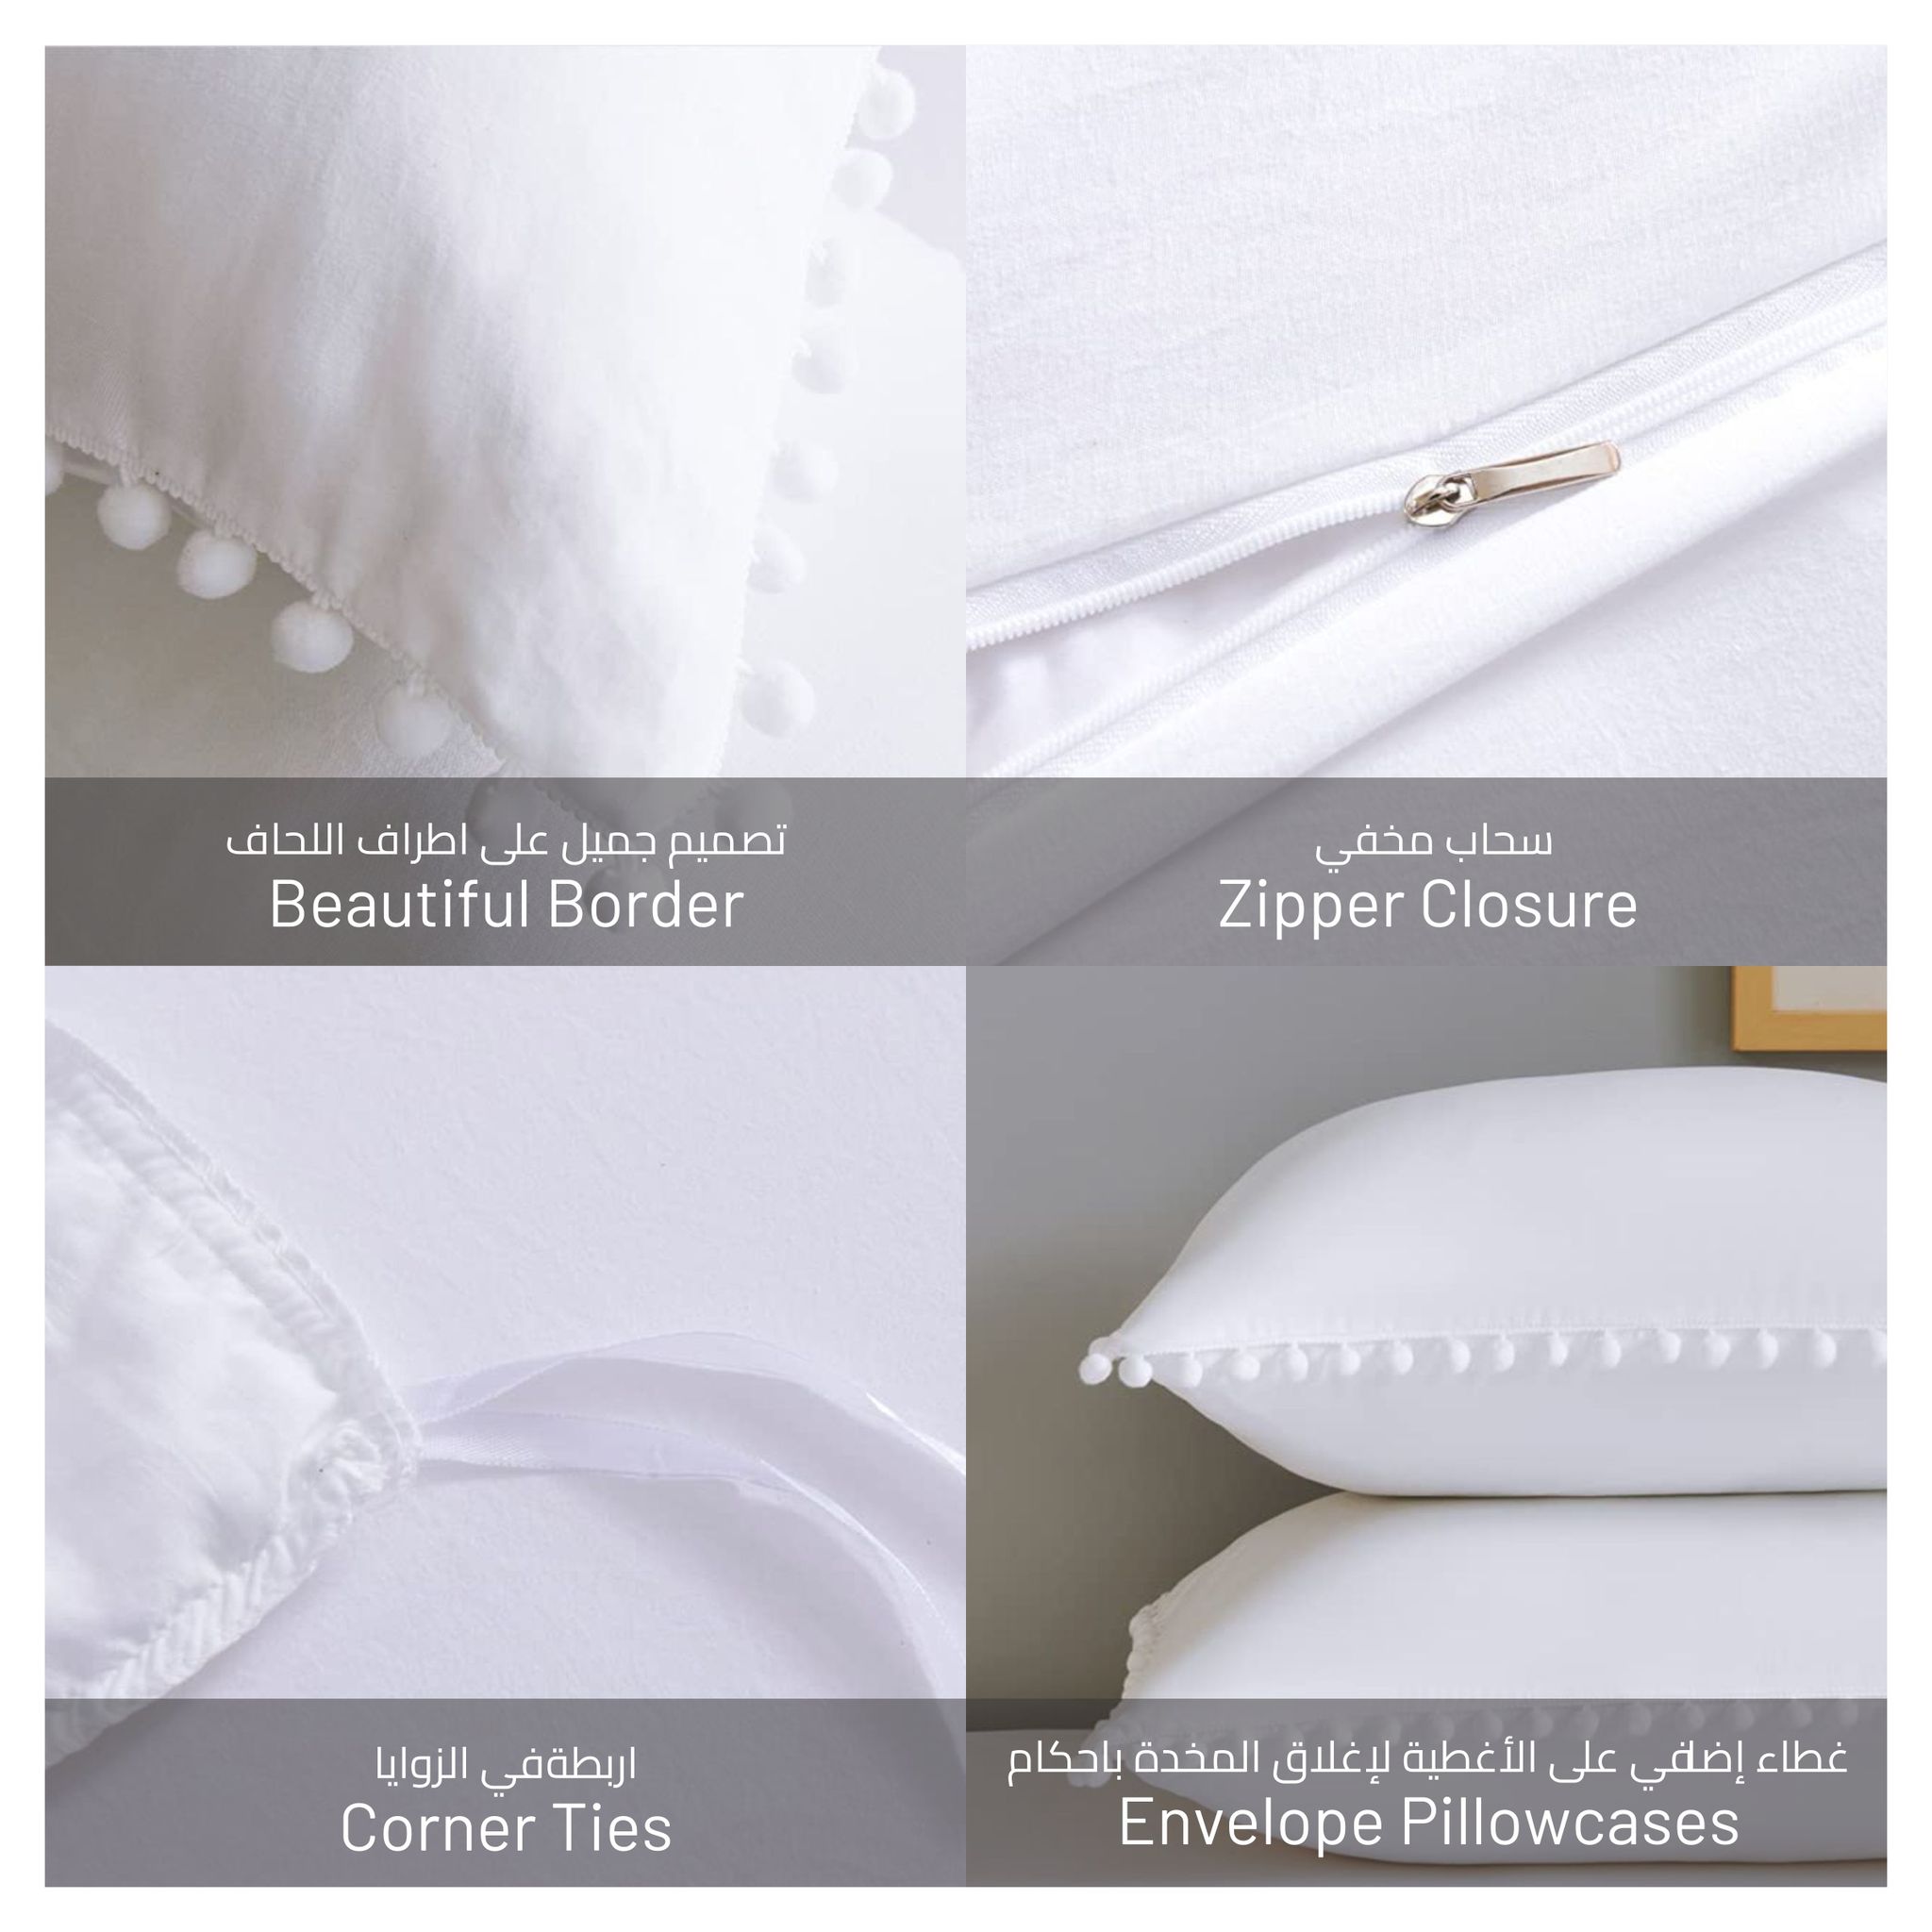 White 4-Piece King Size Duvet Cover Set with Pompom Lace and No Filler.